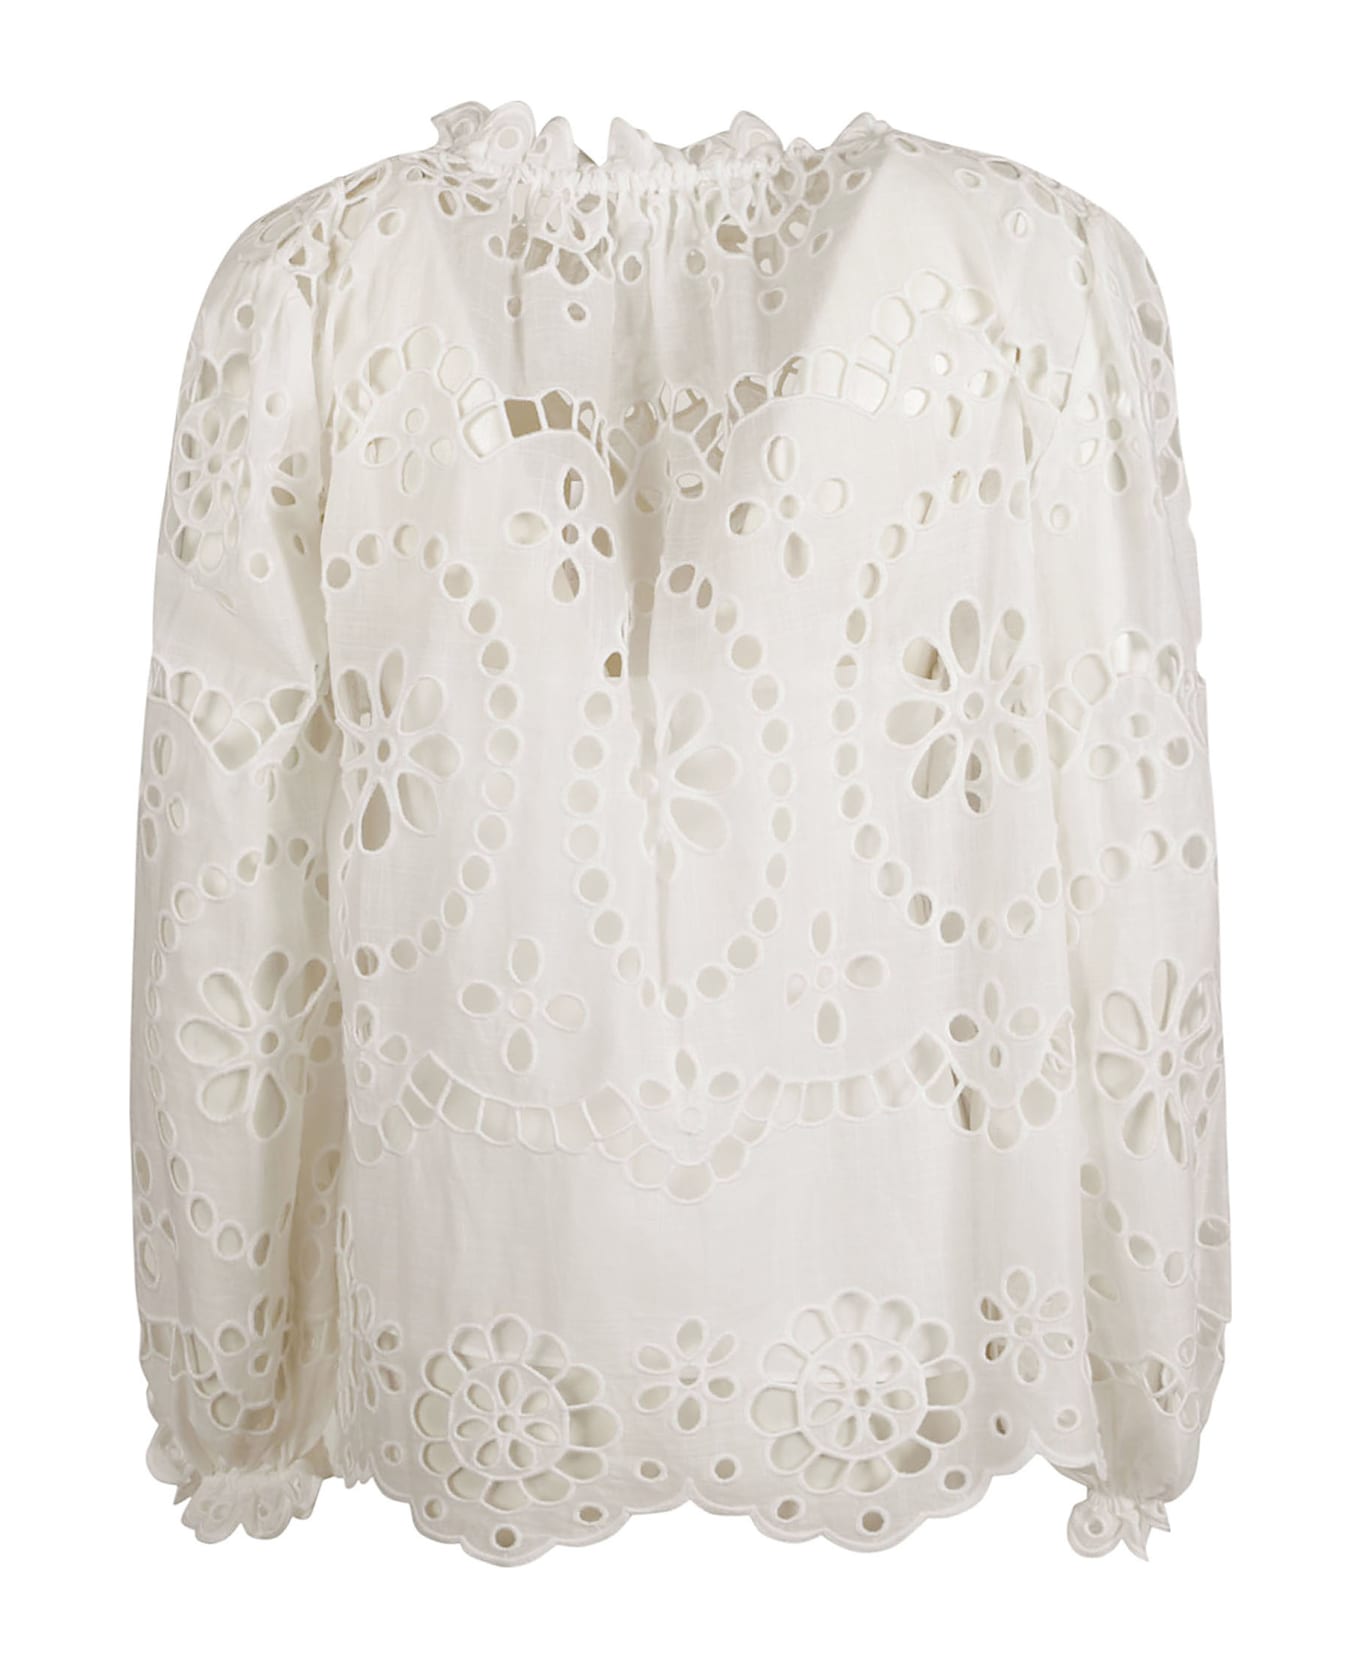 Zimmermann Lexi Embroidered Blouse - Ivory